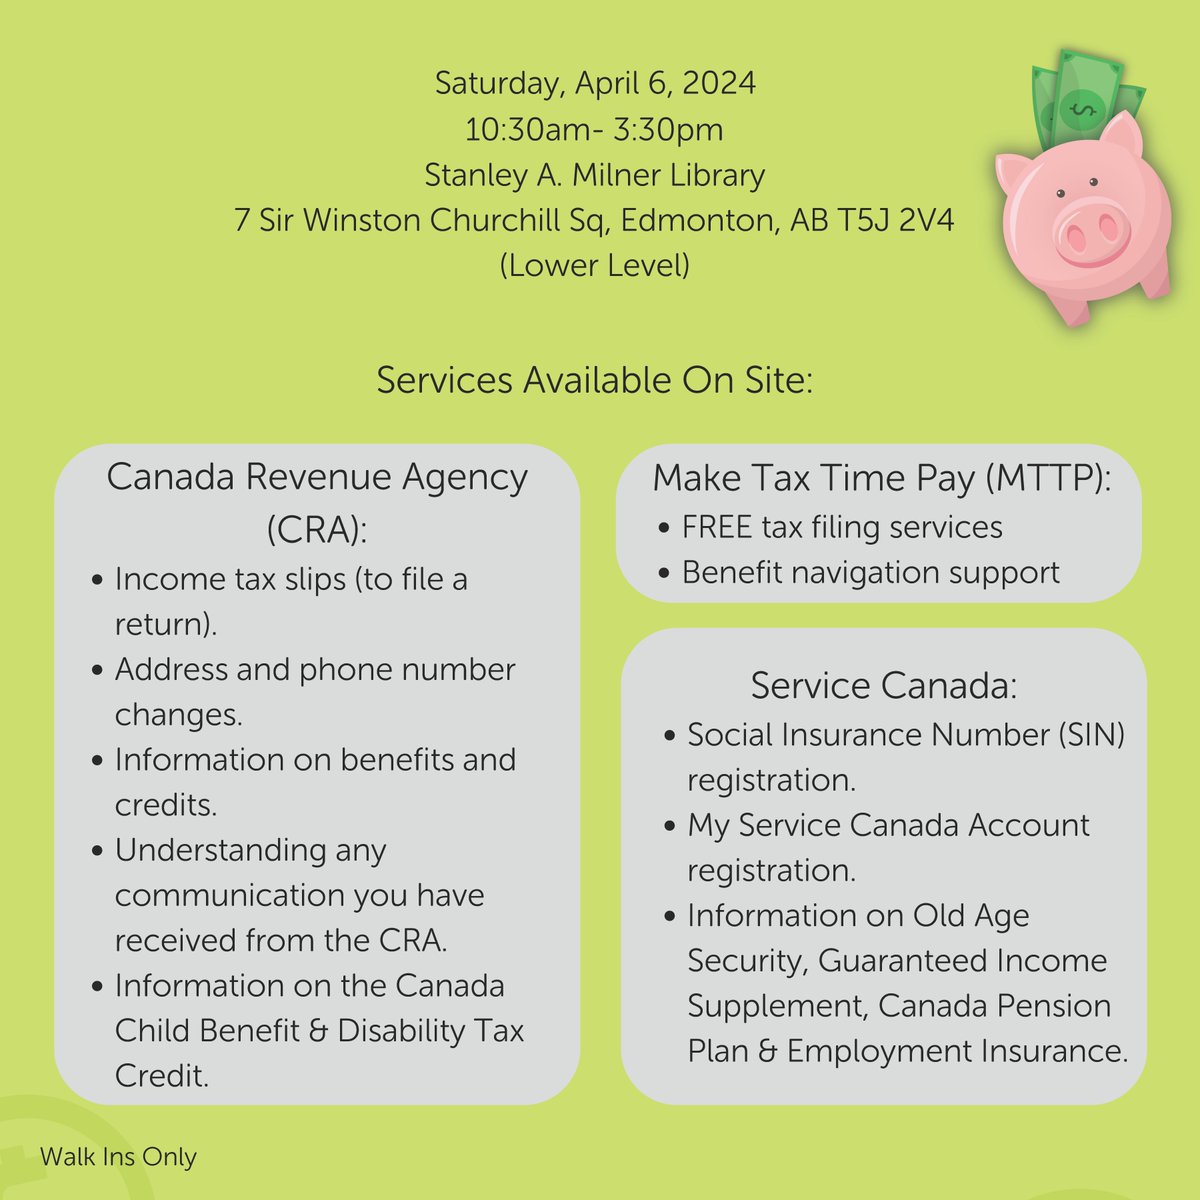 THIS SATURDAY! Our friends at e4c are holding a COMMUNITY CONNECT: FINANCIAL RESOURCE SUPER CLINIC at the Stanley A. Milner Library from 10:30 am to 3:30 pm. WALK-INS ONLY! See image for available services. Thank YOU! #yeg #edmonton #yegfoodbank #feedyeg @e4cAlberta @EPLdotCA